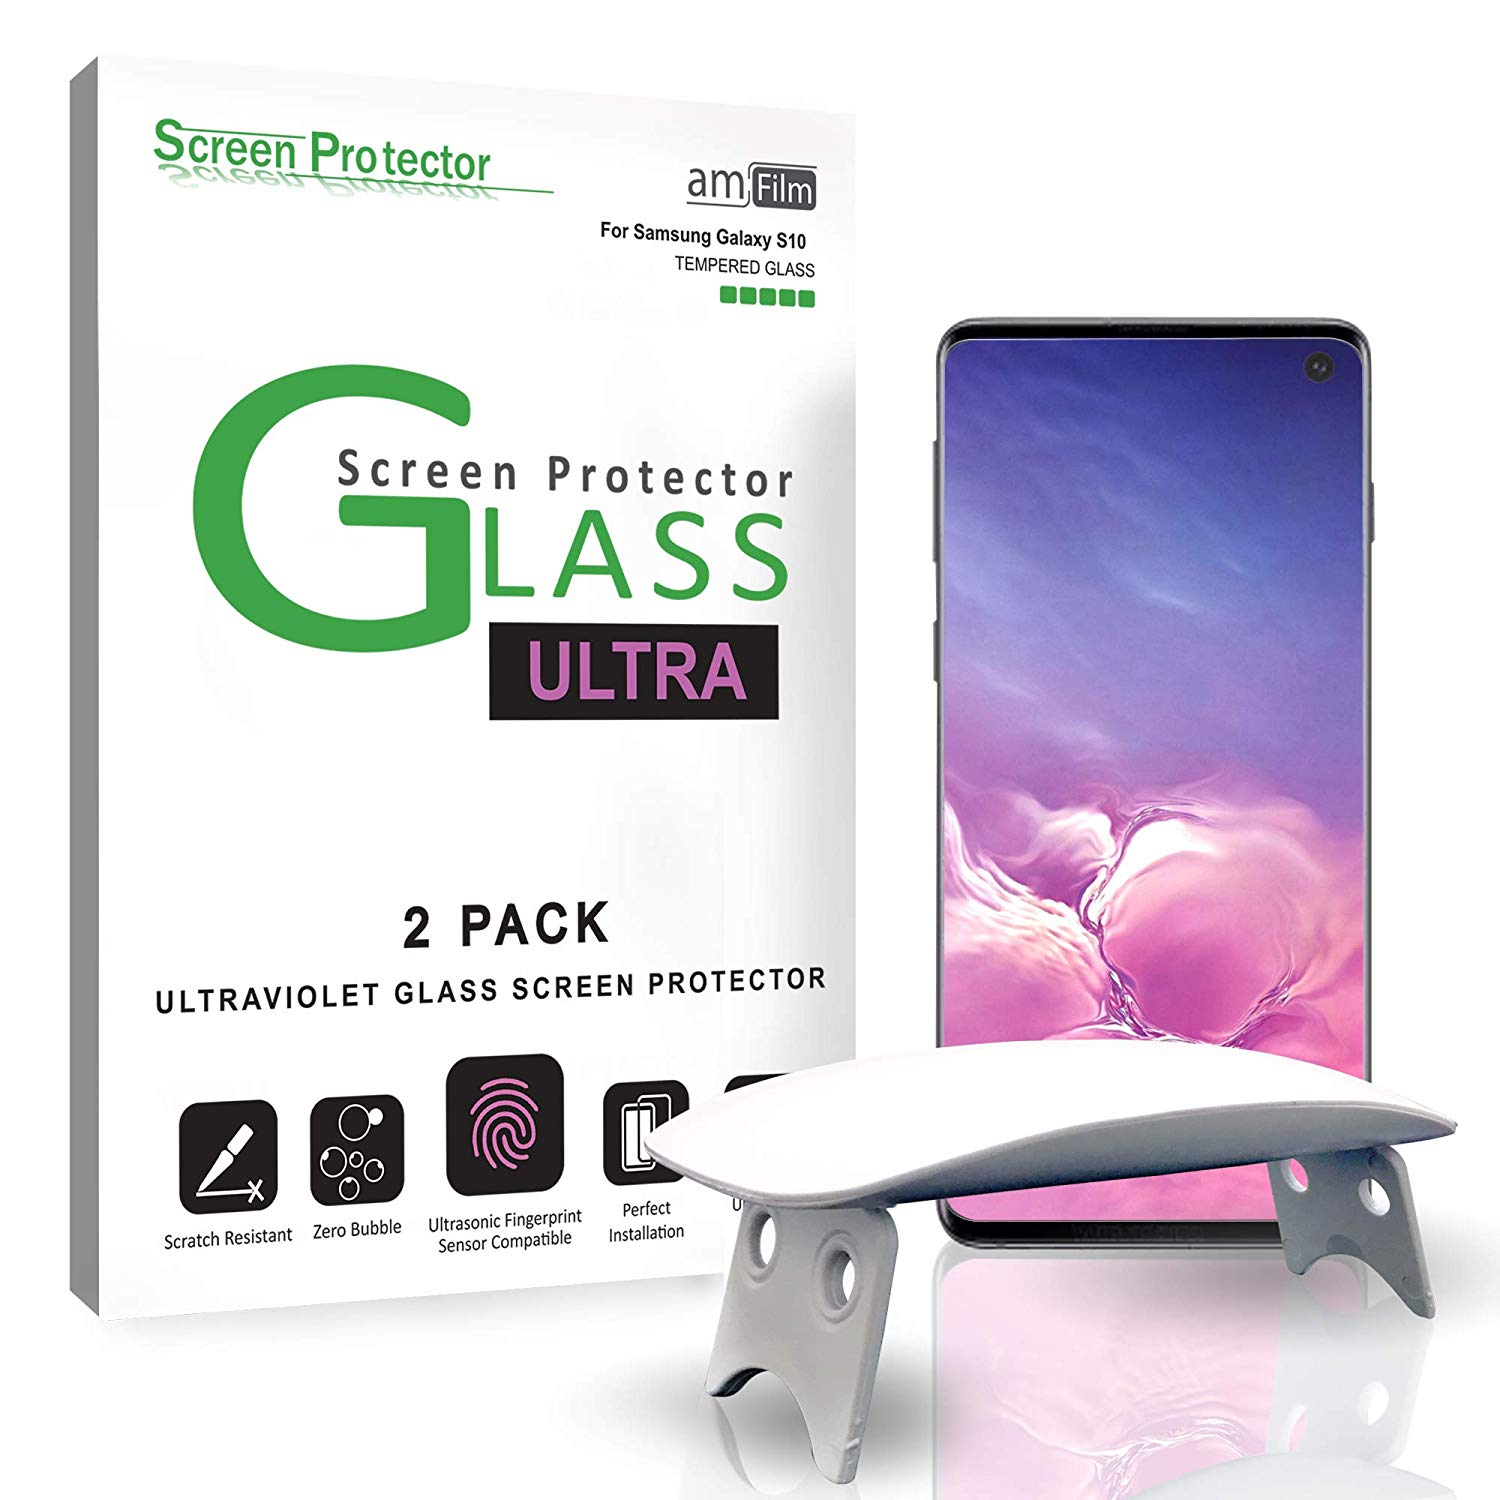 Galaxy S10 Screen Protector 9H Tempered Glass Include a Camera Lens Protector,Ultrasonic Fingerprint Compatible,HD Clear,3D Curved for Samsung S10 Glass Screen Protector 2+2 Pack 